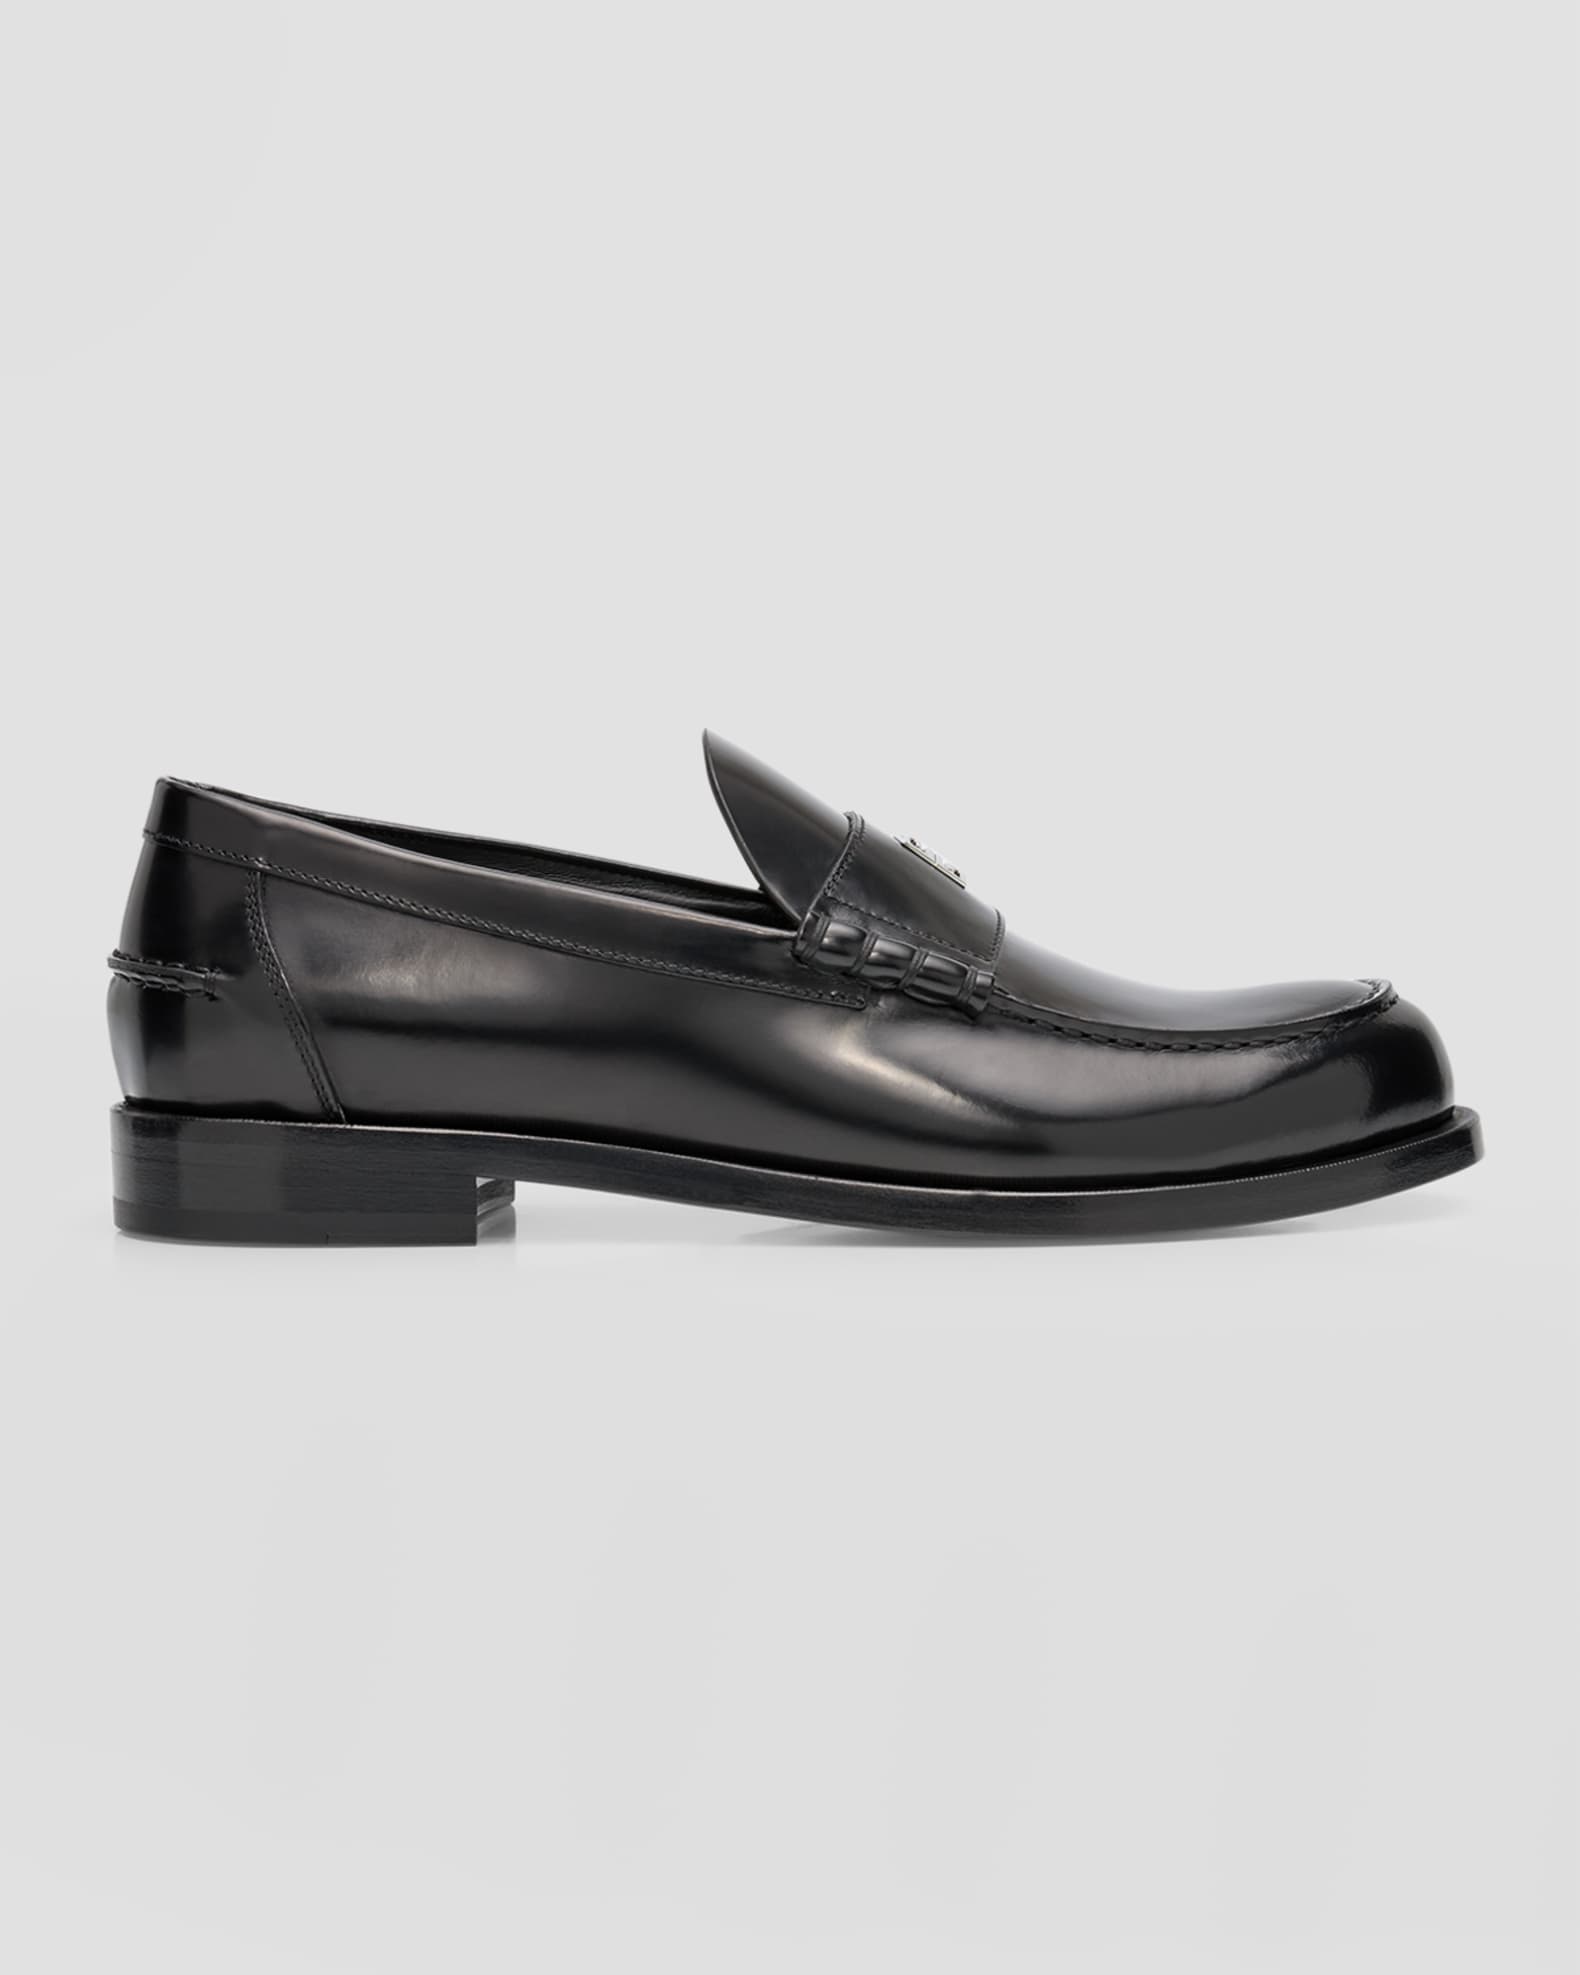 Givenchy Men's Mr G Brushed Leather Penny Loafers | Neiman Marcus